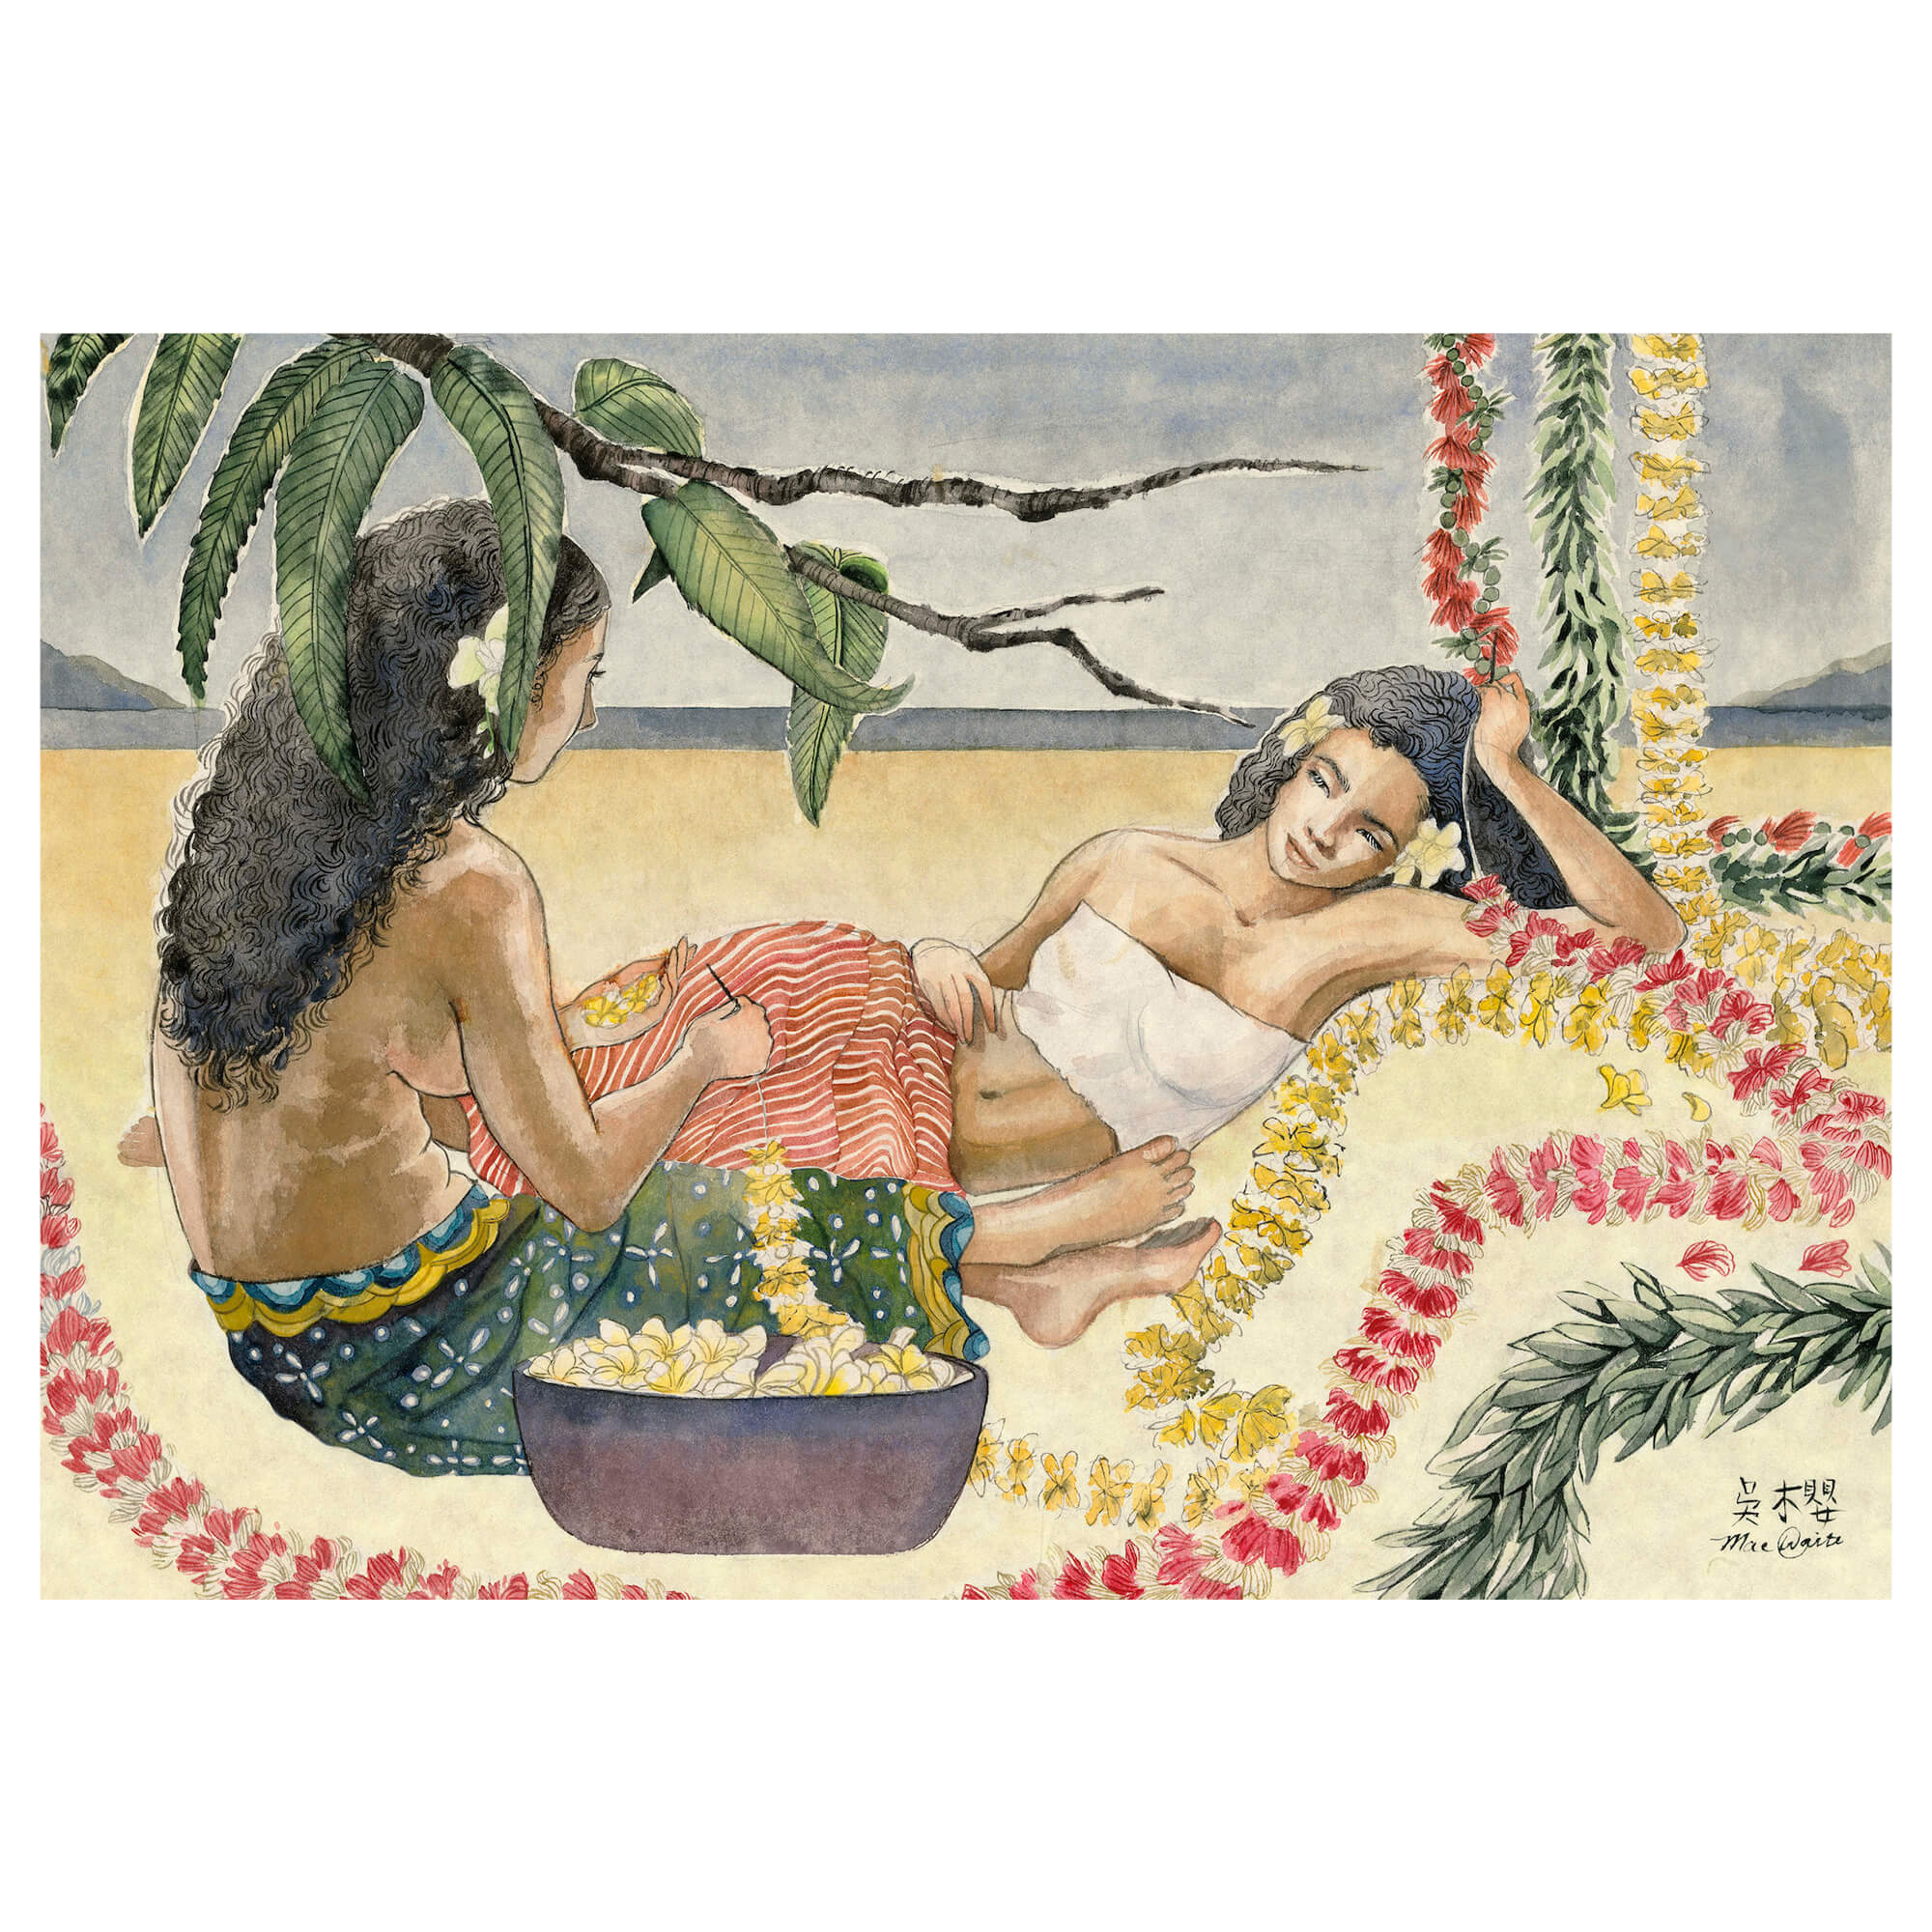 A matted art print of two flower ladies making lei’s on the beach by Hawaii artist Mae Waite